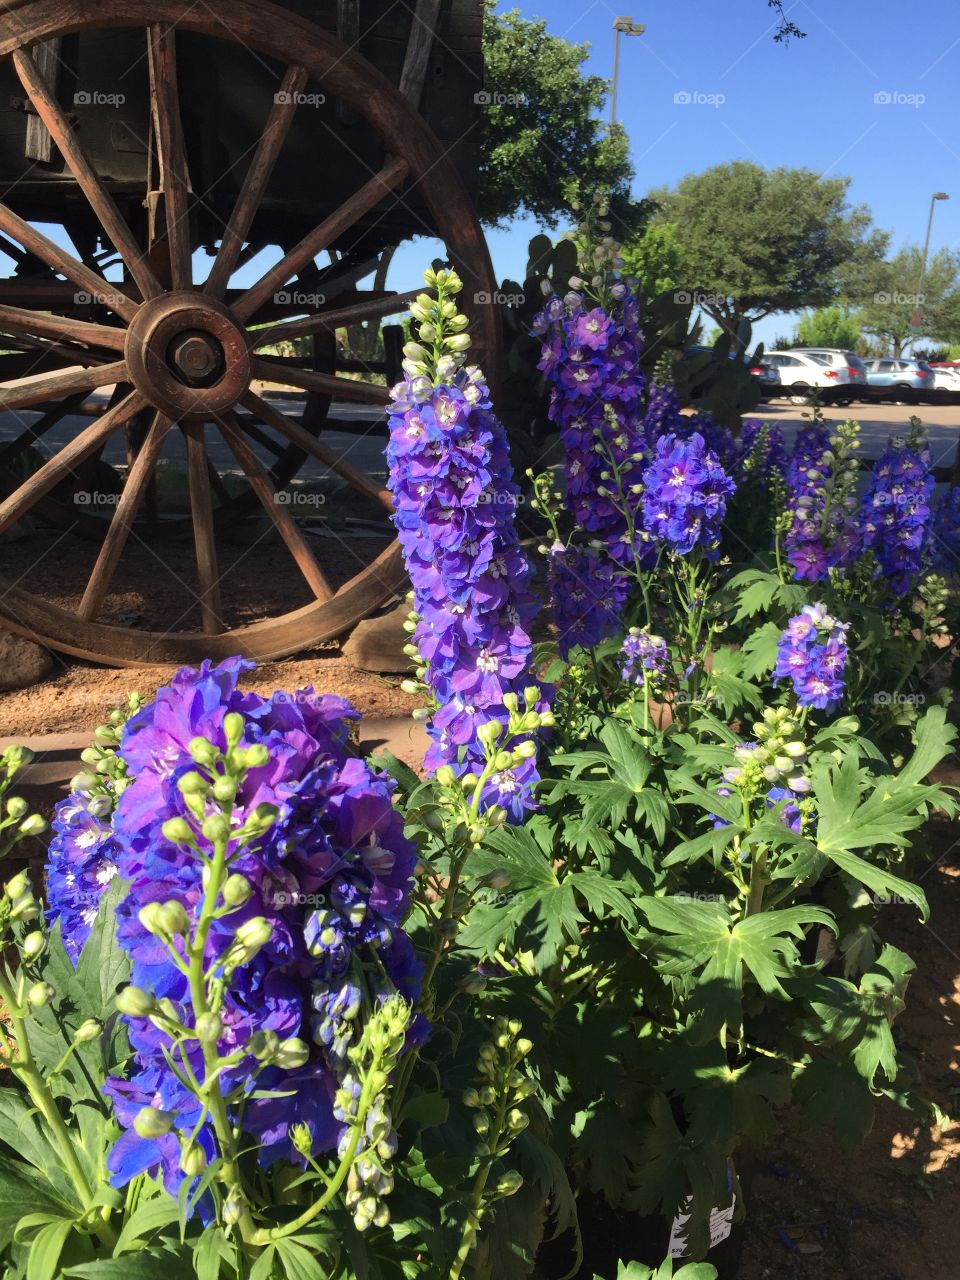 Bluebonnets stand out in front of a wooden wagon wheel. No people in sight.      